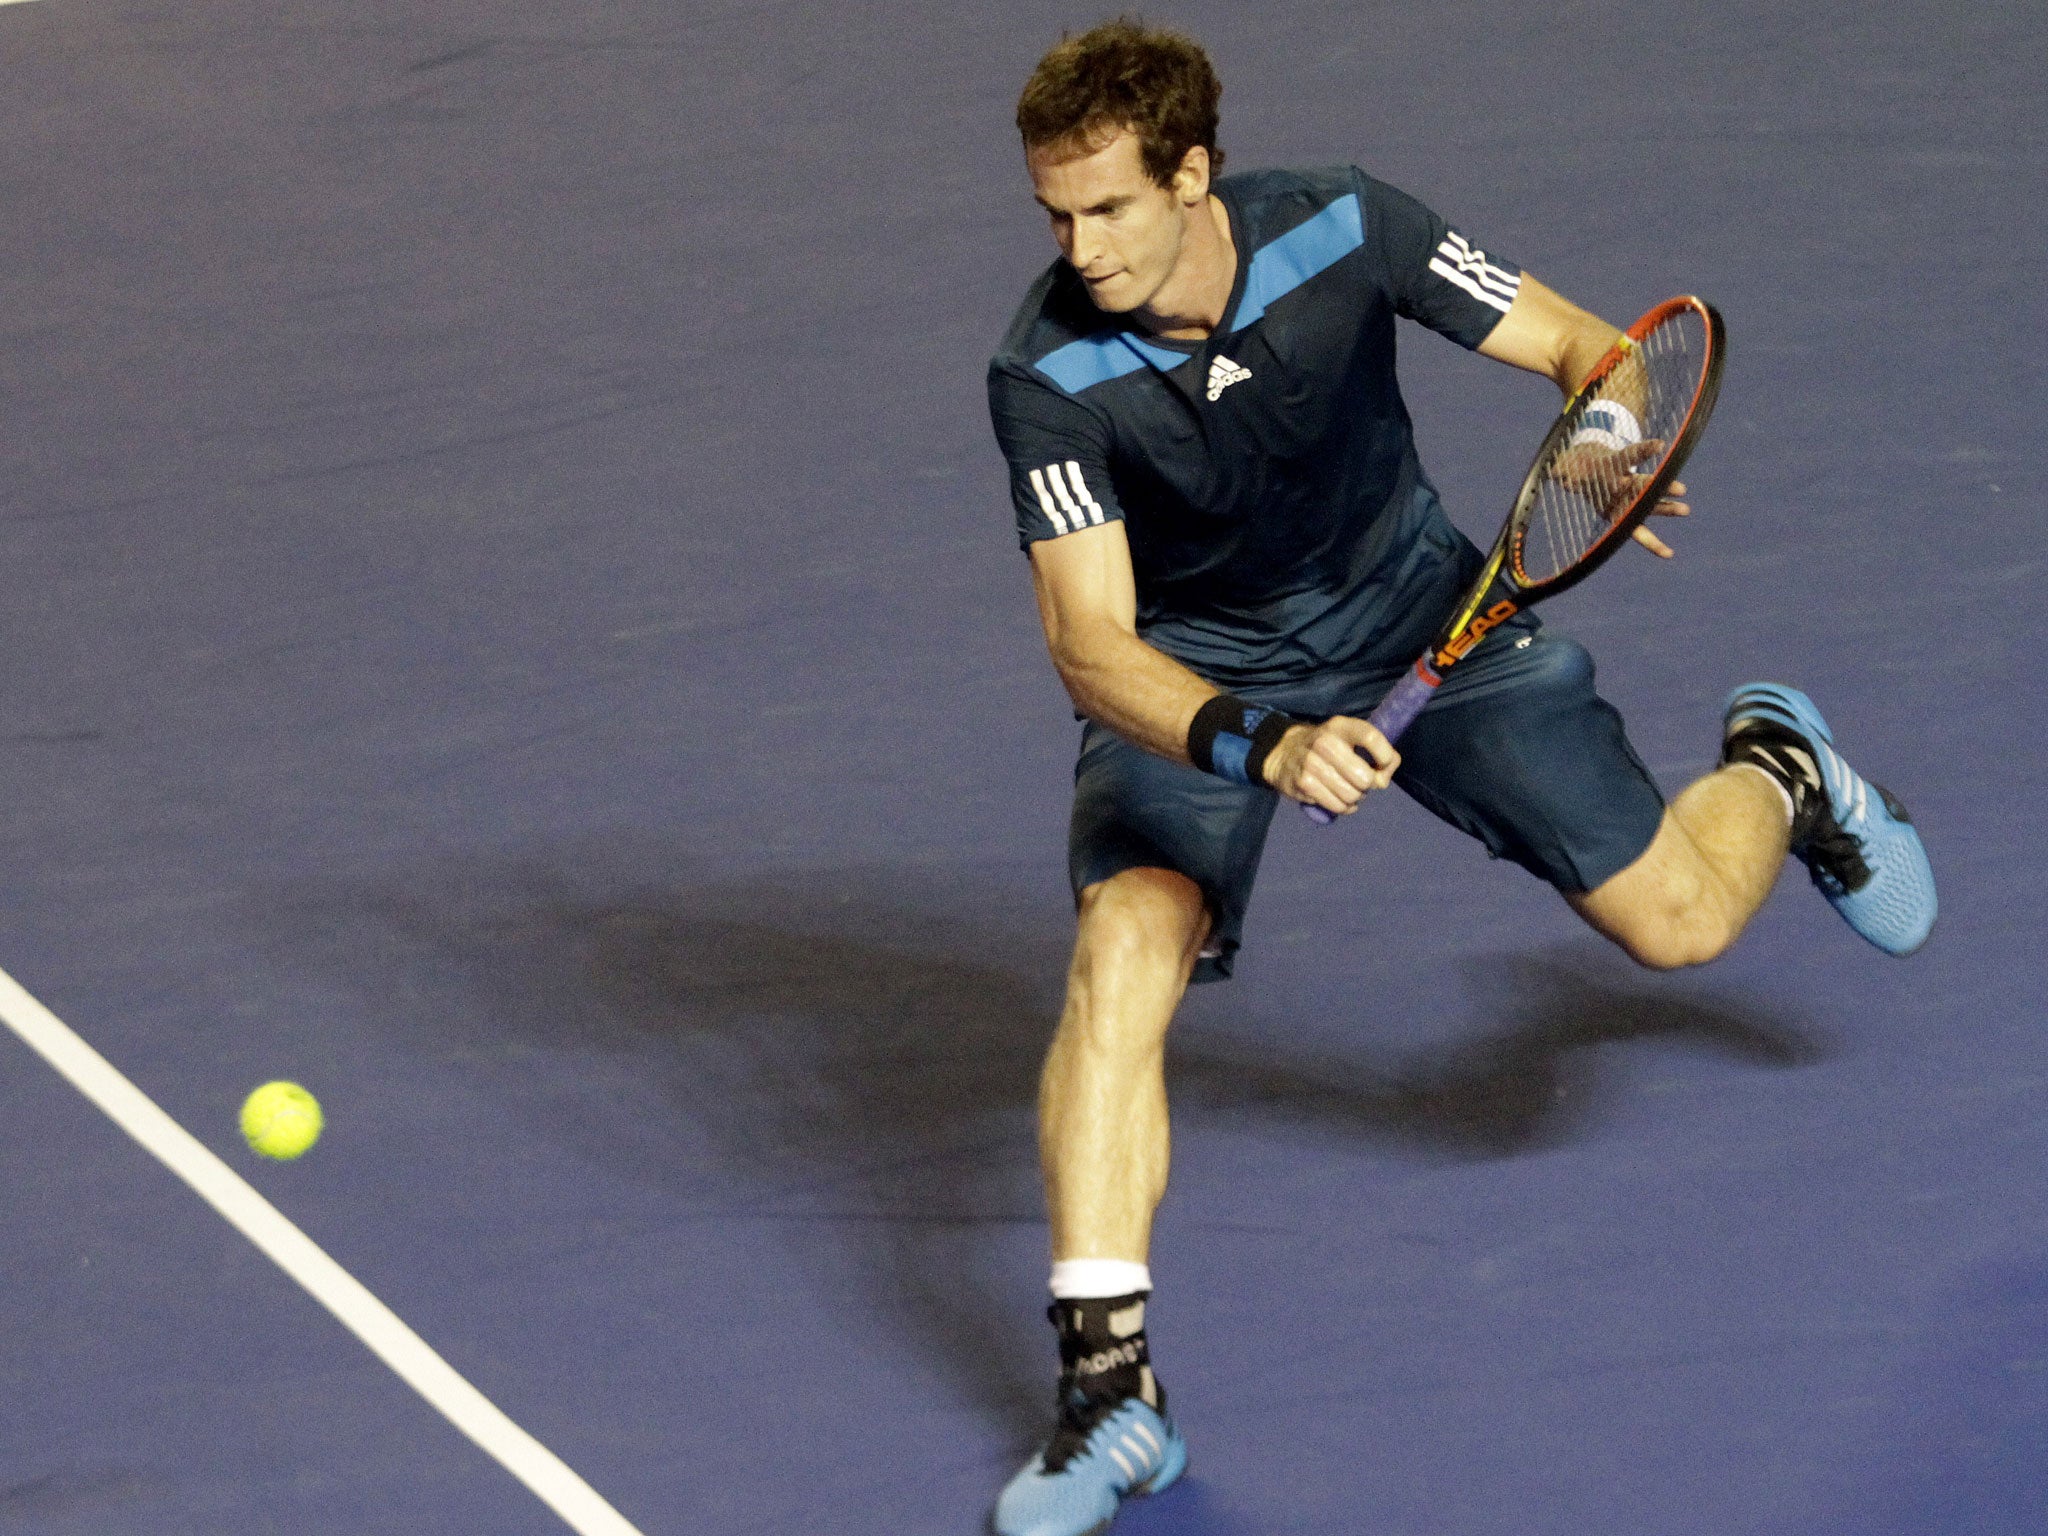 Andy Murray plays a backhand during his victory at the Mexico Open